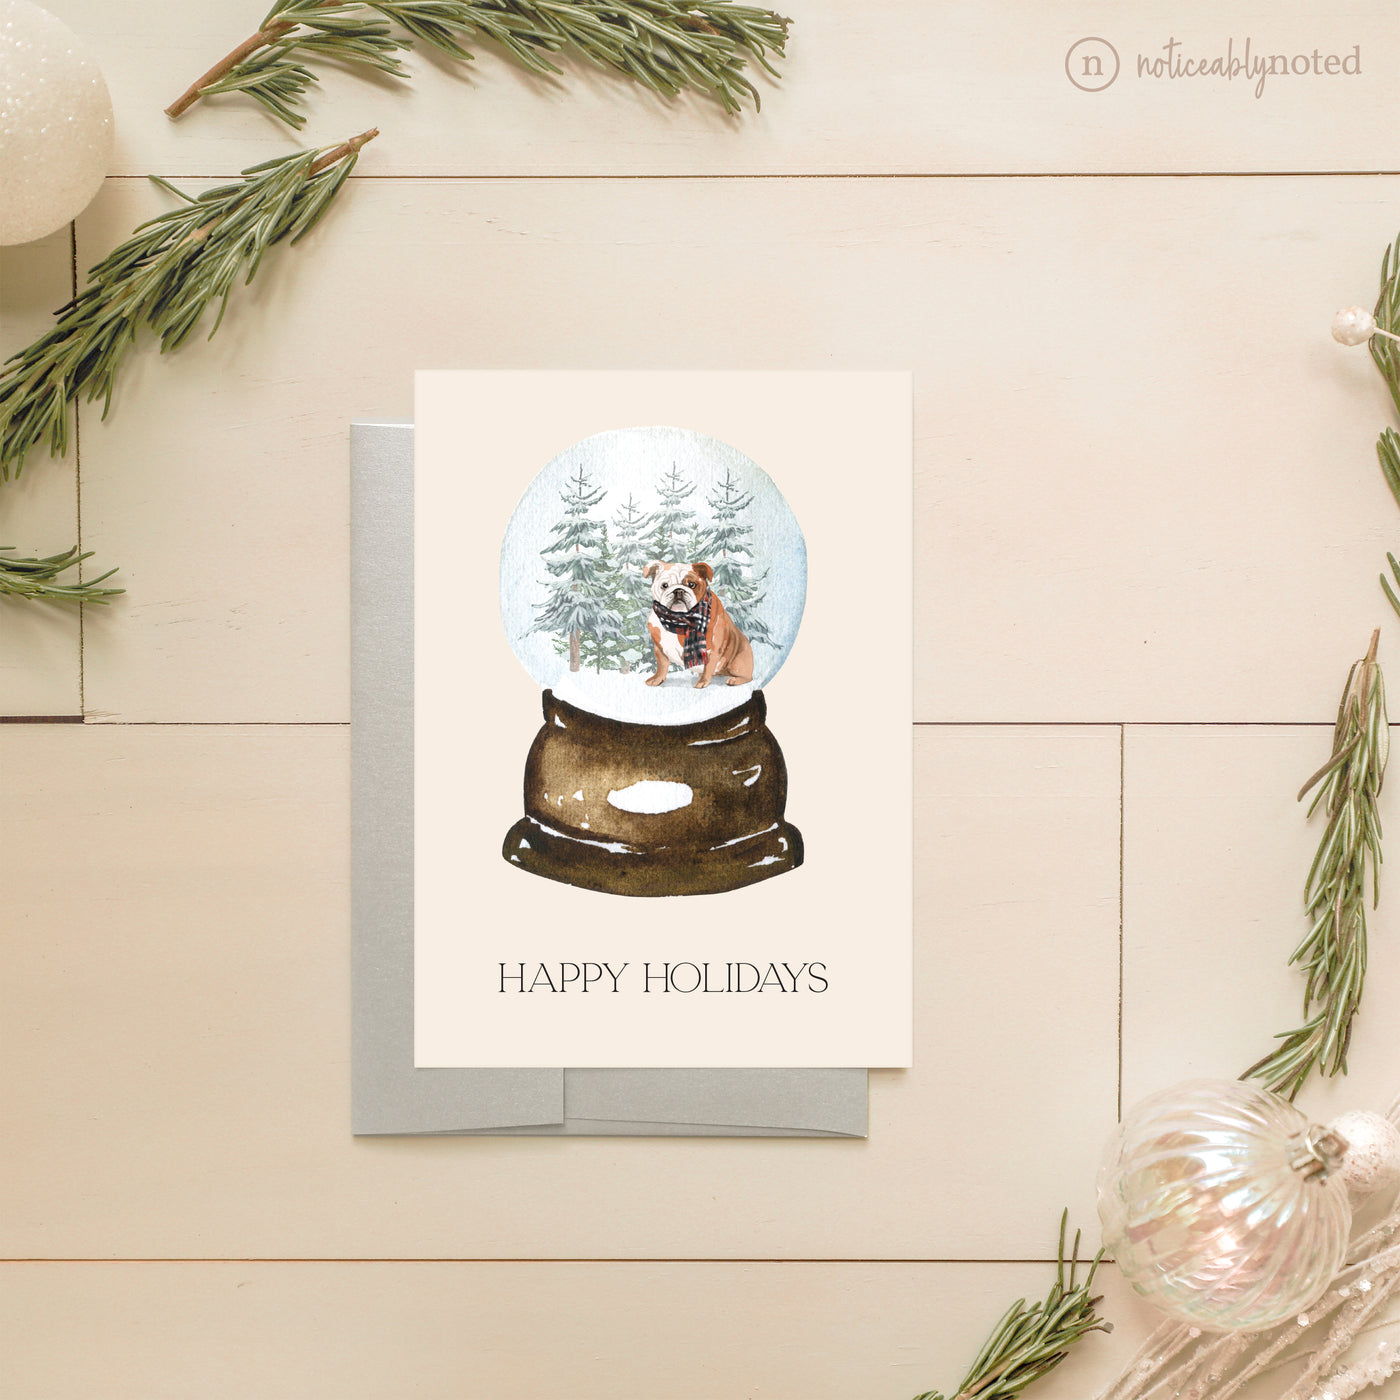 English Bulldog Christmas Cards | Noticeably Noted